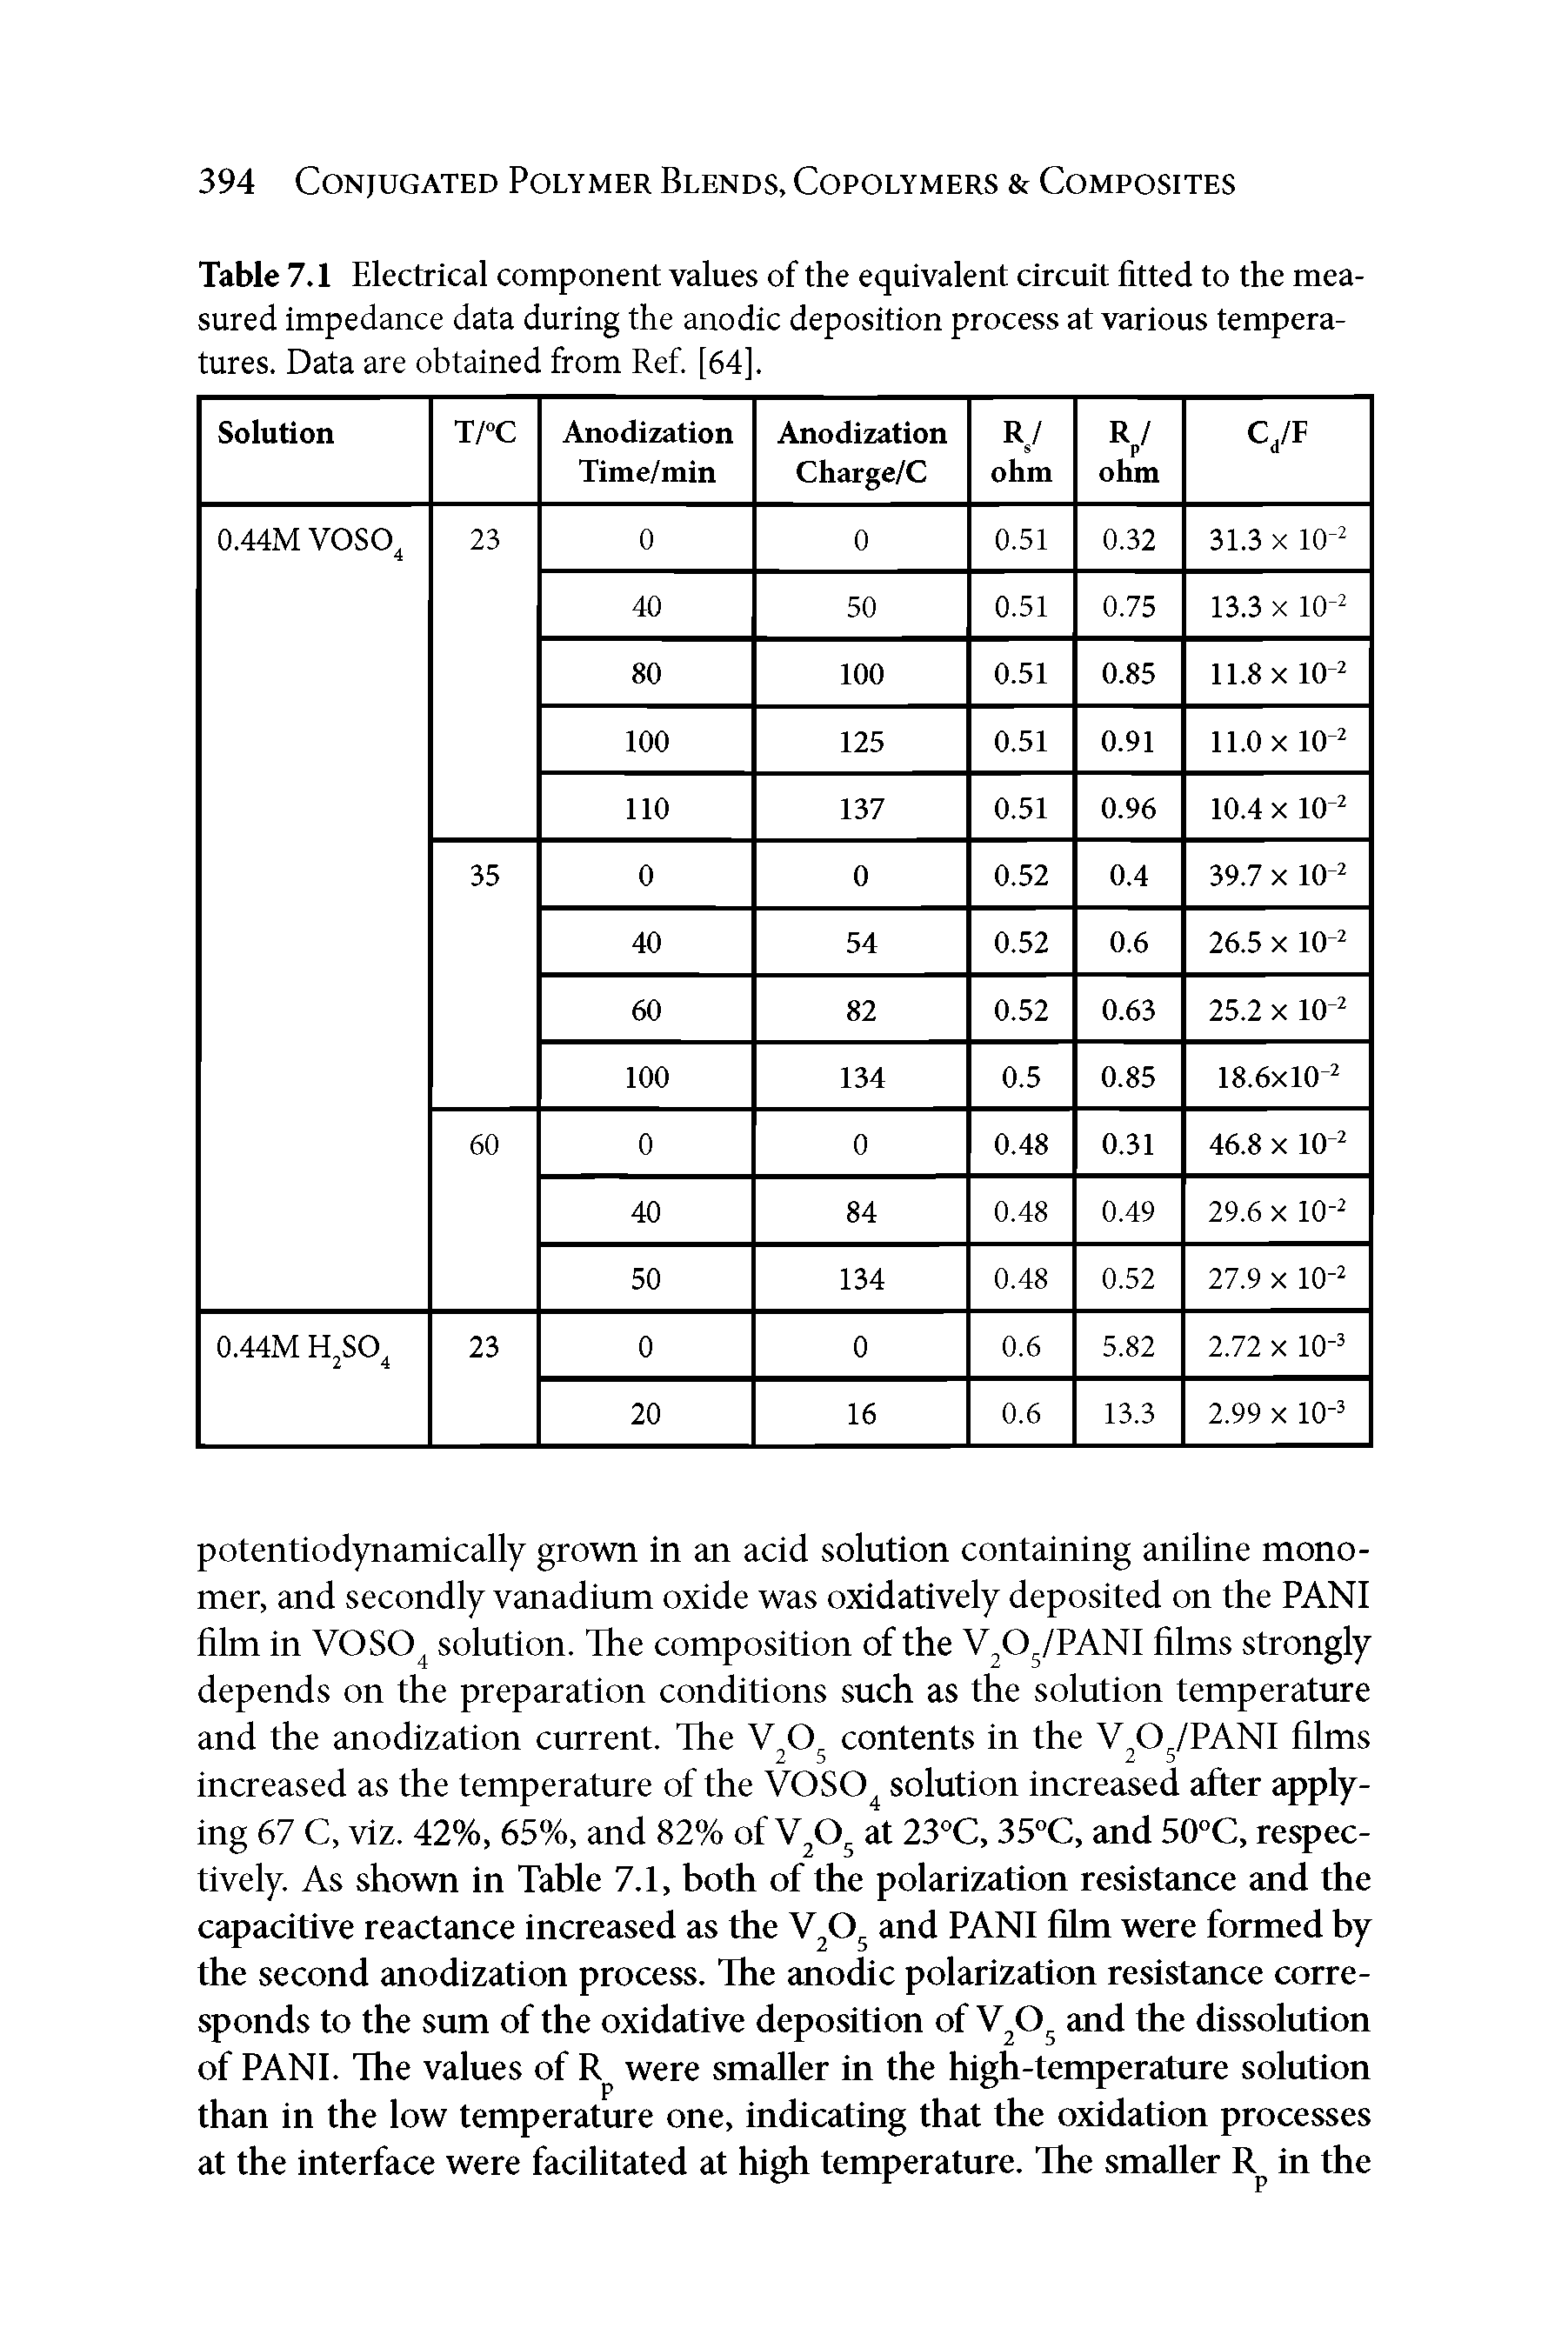 Table 7.1 Electrical component values of the equivalent circuit fitted to the measured impedance data during the anodic deposition process at various temperatures. Data are obtained from Ref [64],...